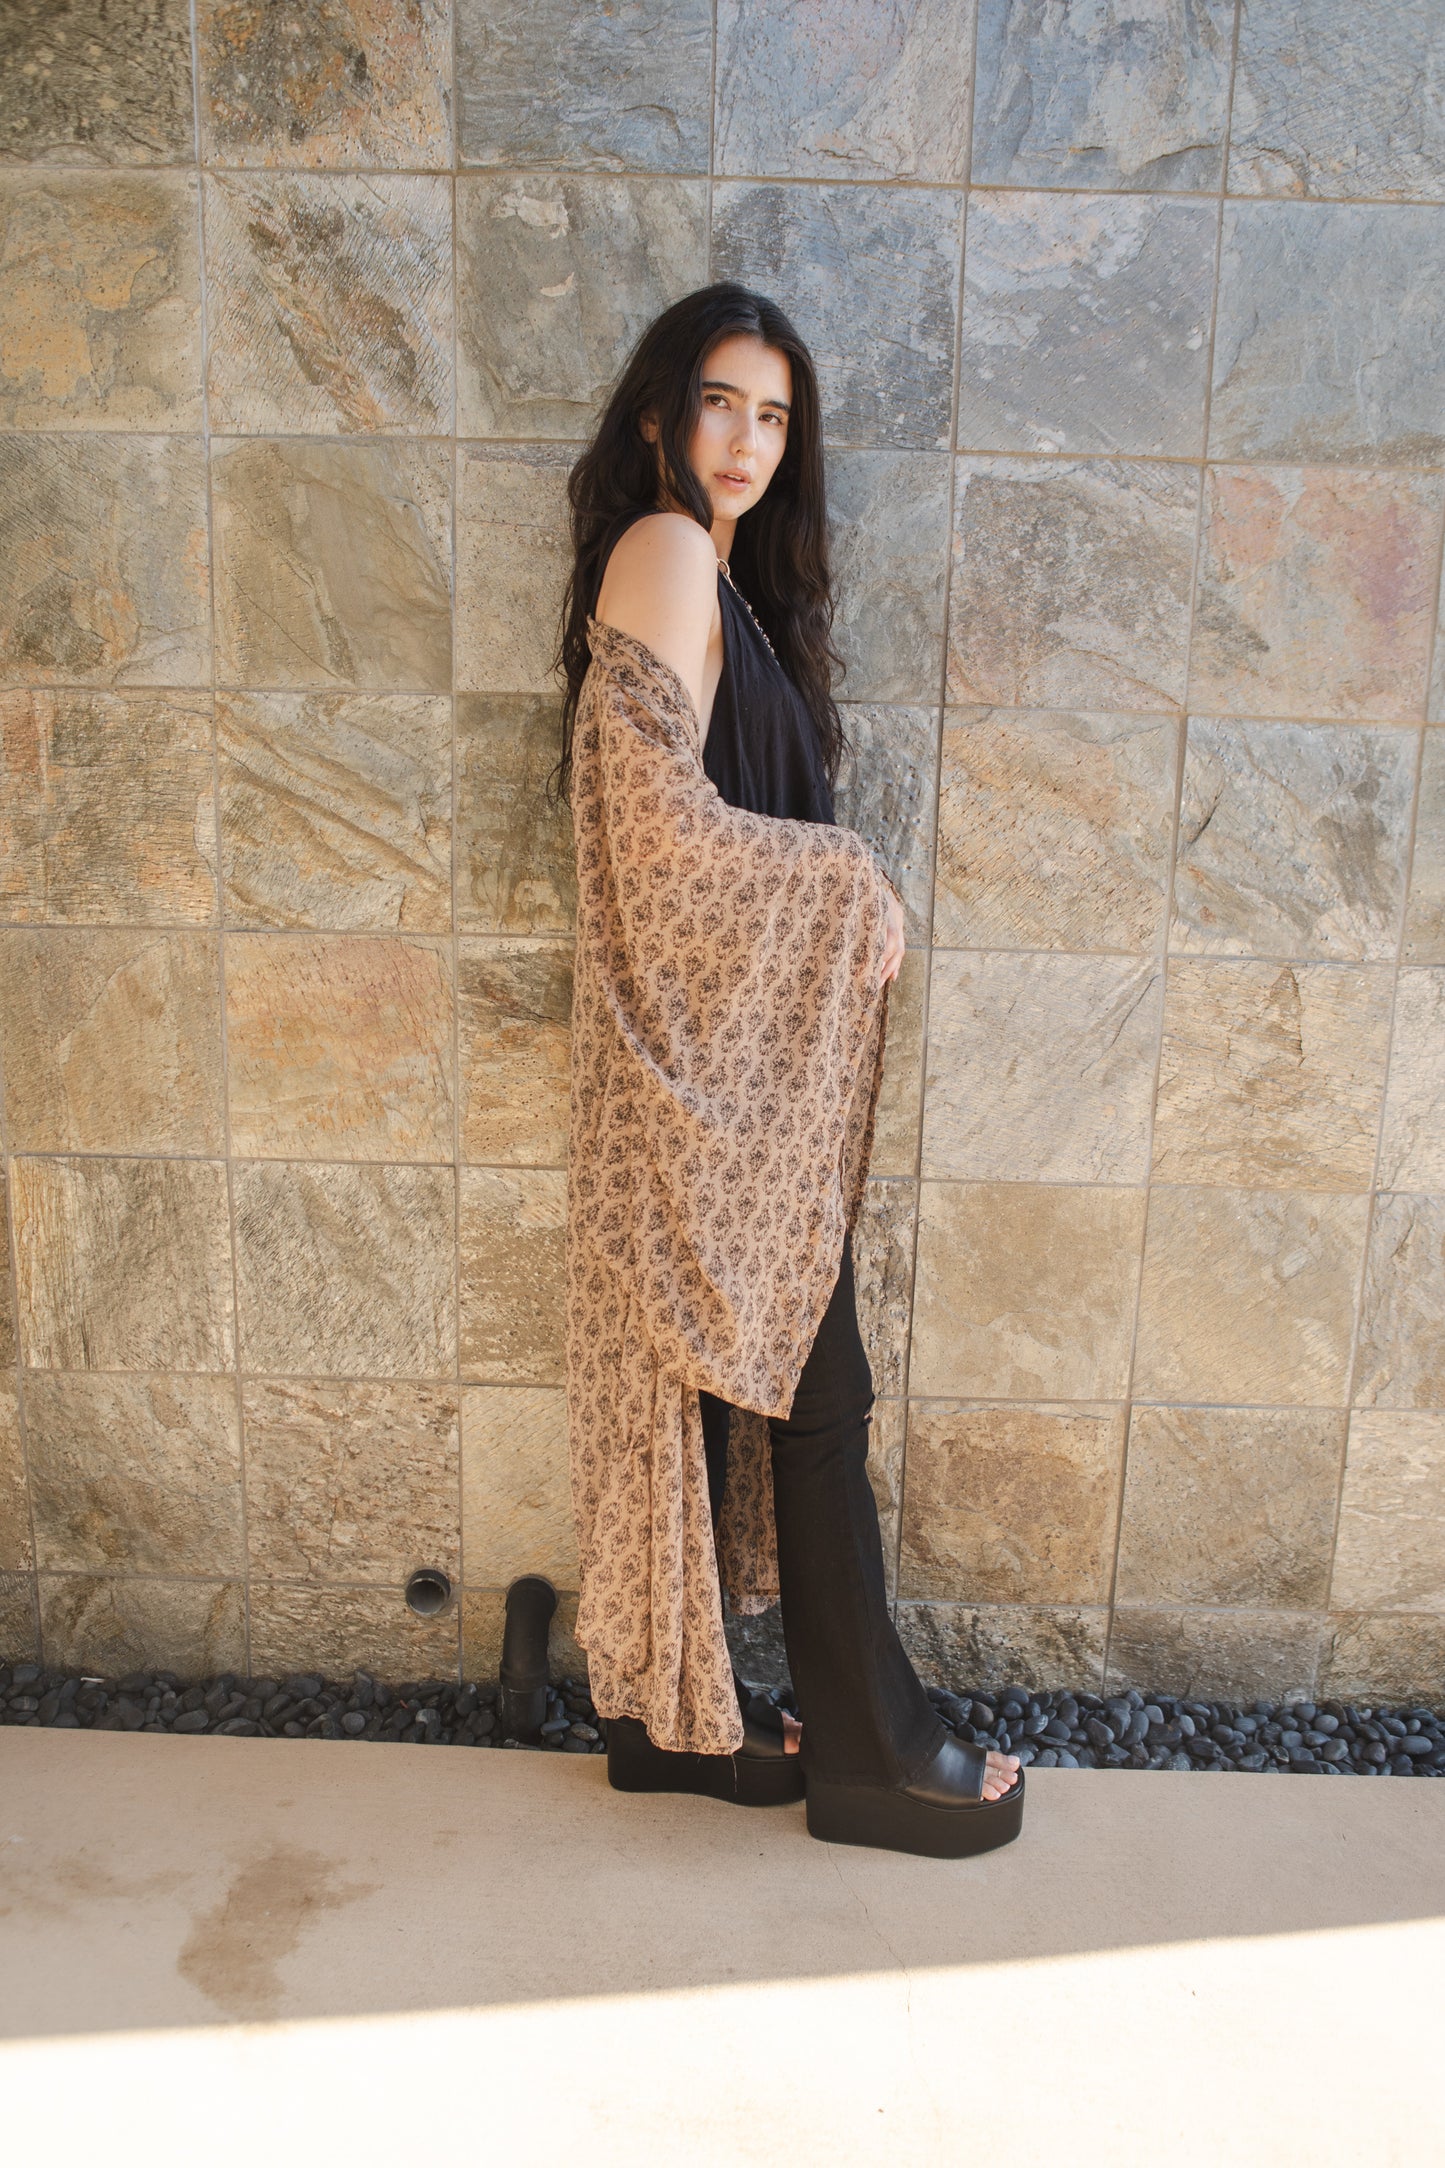 jennafer grace Dado kimono taupe beige brown black victorian gothic vintage inspired coverup wrap dress with pockets duster jacket robe goth boho bohemian hippie whimsical romantic beach poolside resort cabana lounge wear unisex handmade in California USA